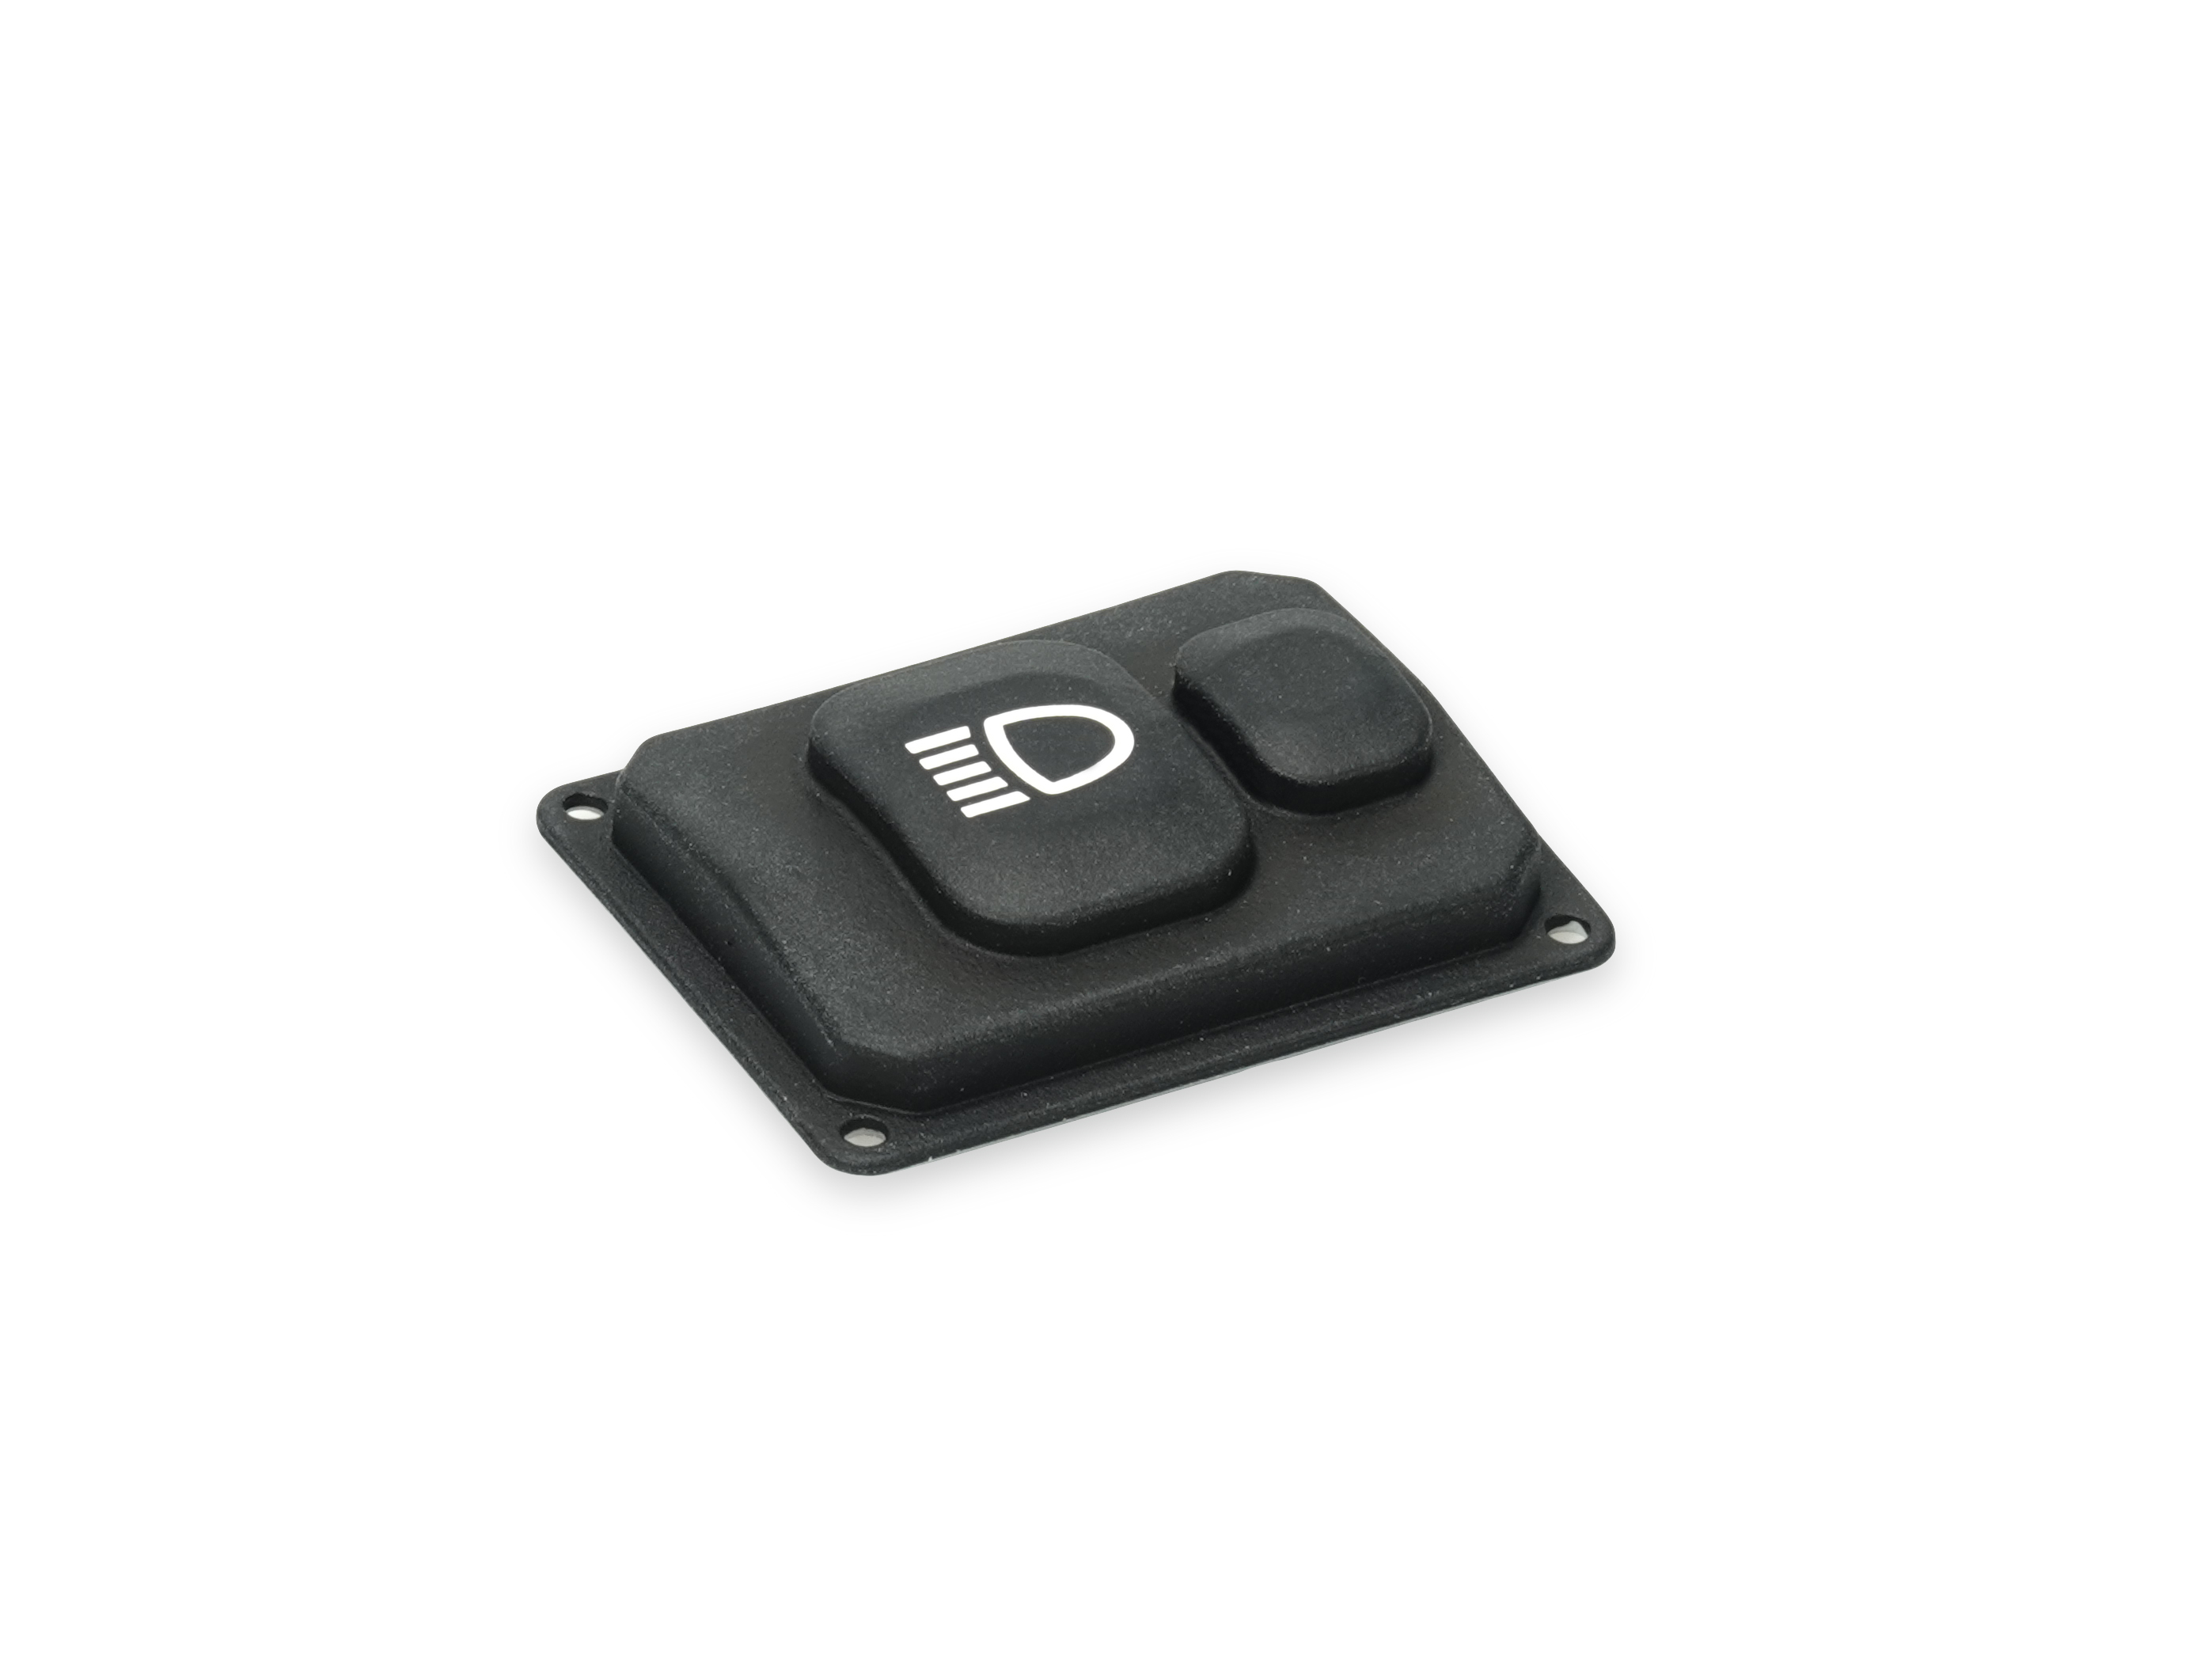 Silicone button for SL AF remote control